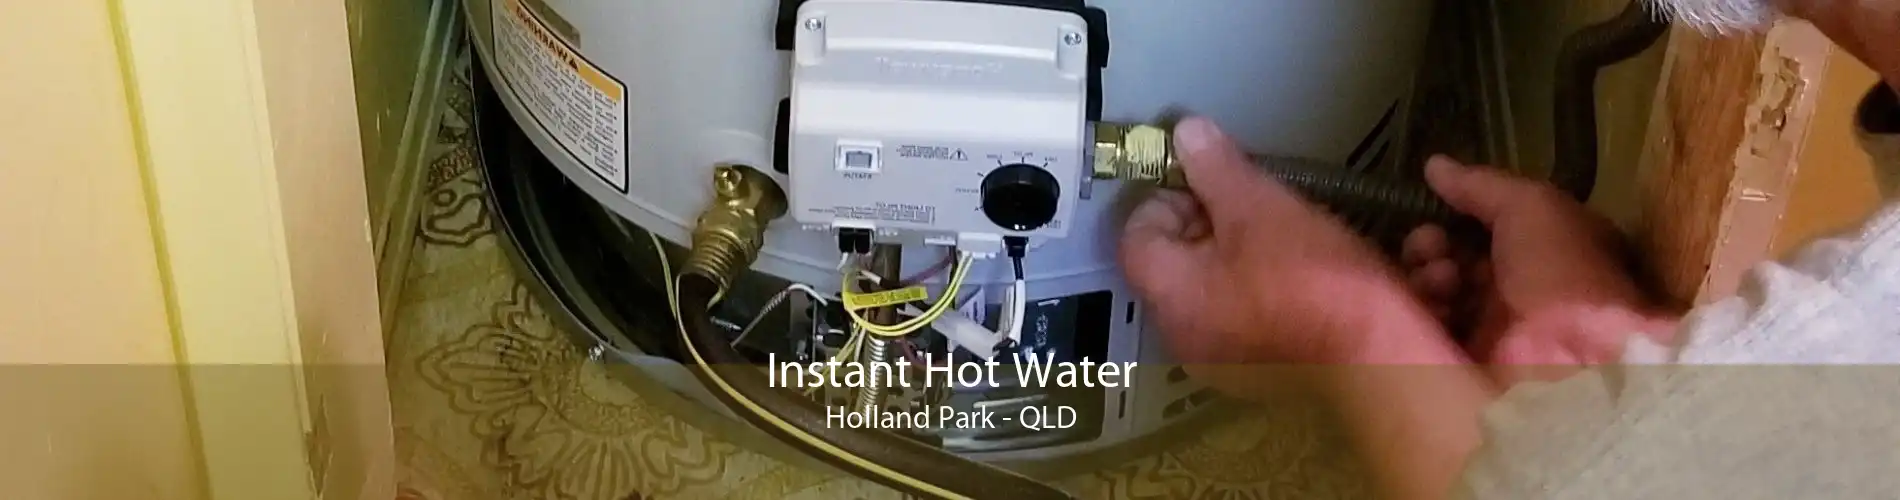 Instant Hot Water Holland Park - QLD